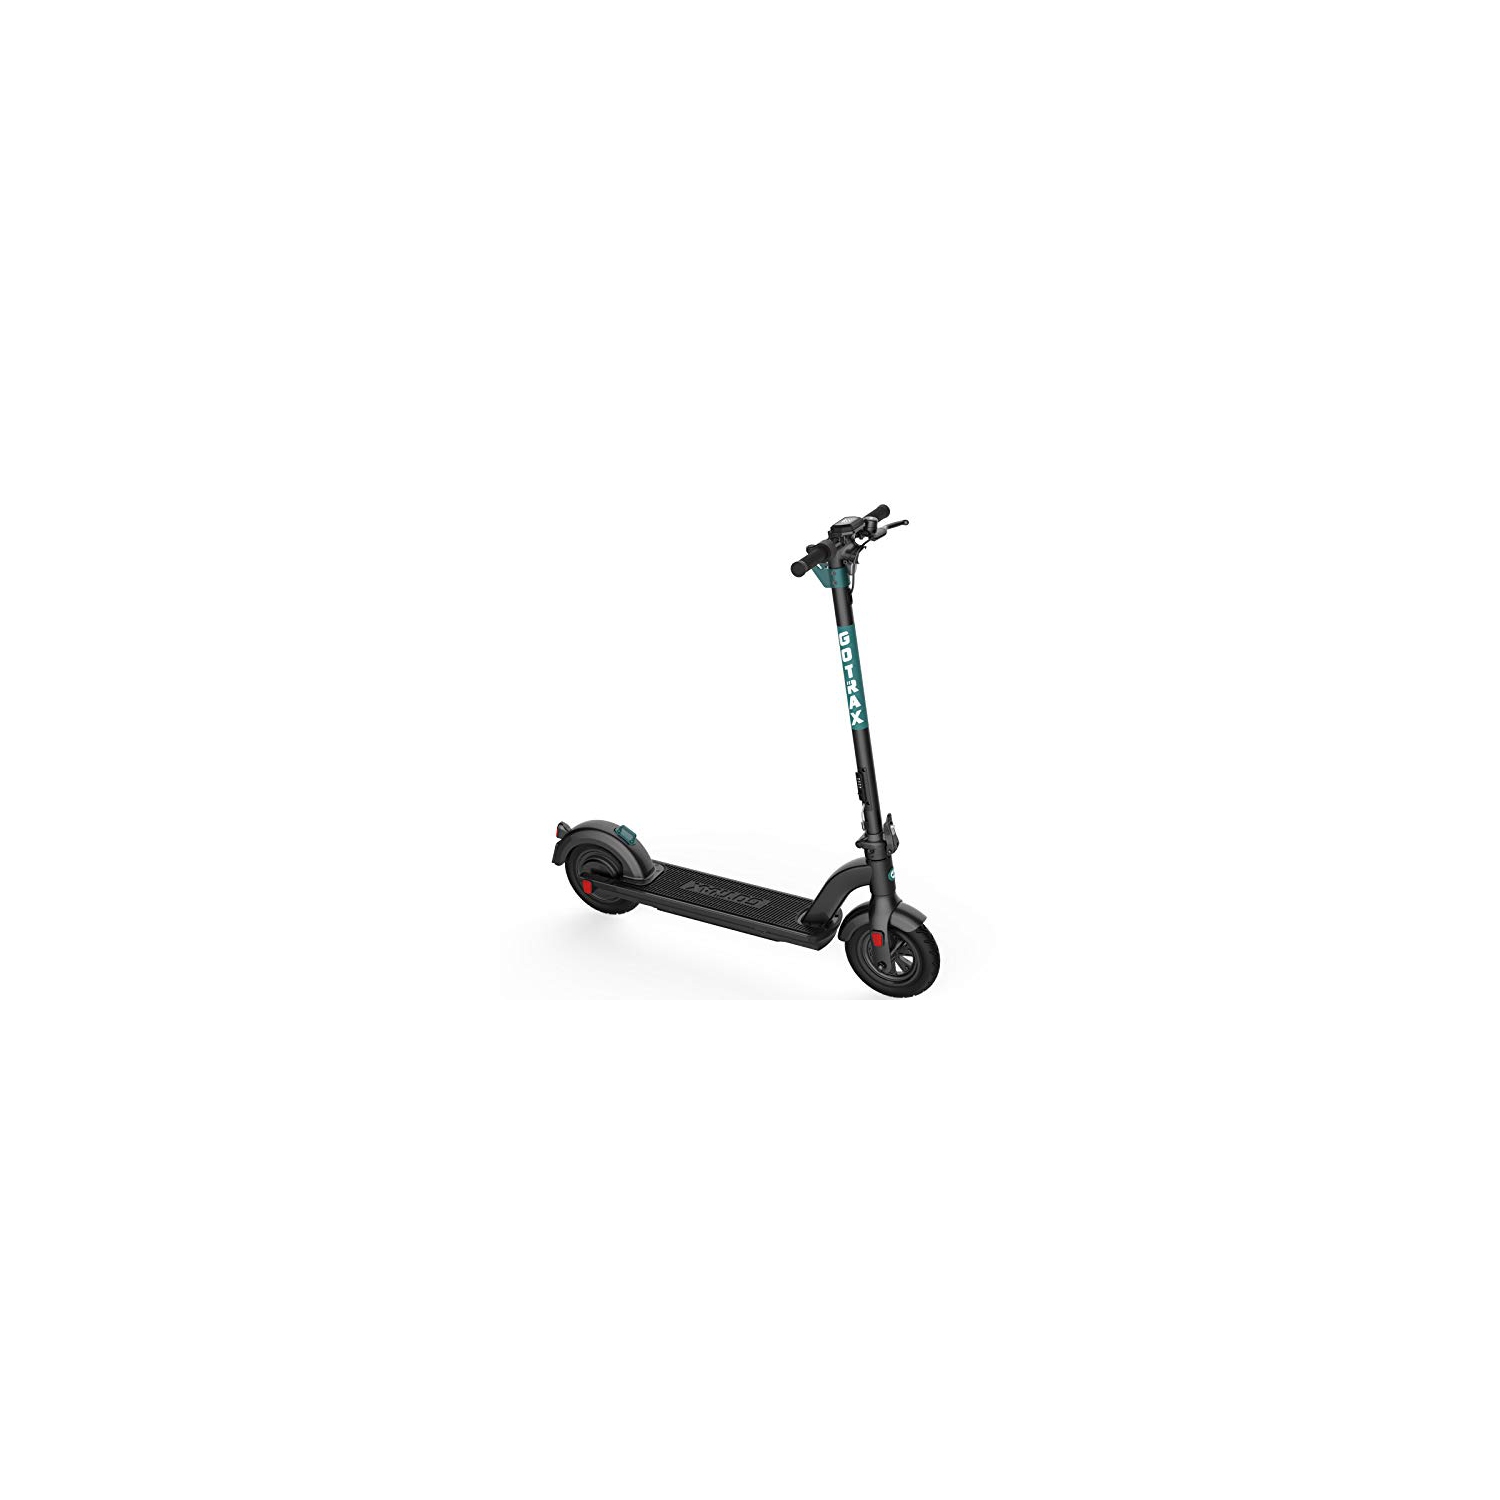 GOTRAX G MAX Ultra Foldable Electric Scooter with 10" Air Filled Tires, Large LG Battery 36V/15.6Ah up 45 Miles Long-Range, Powerful 350W Motor up 20 MPH